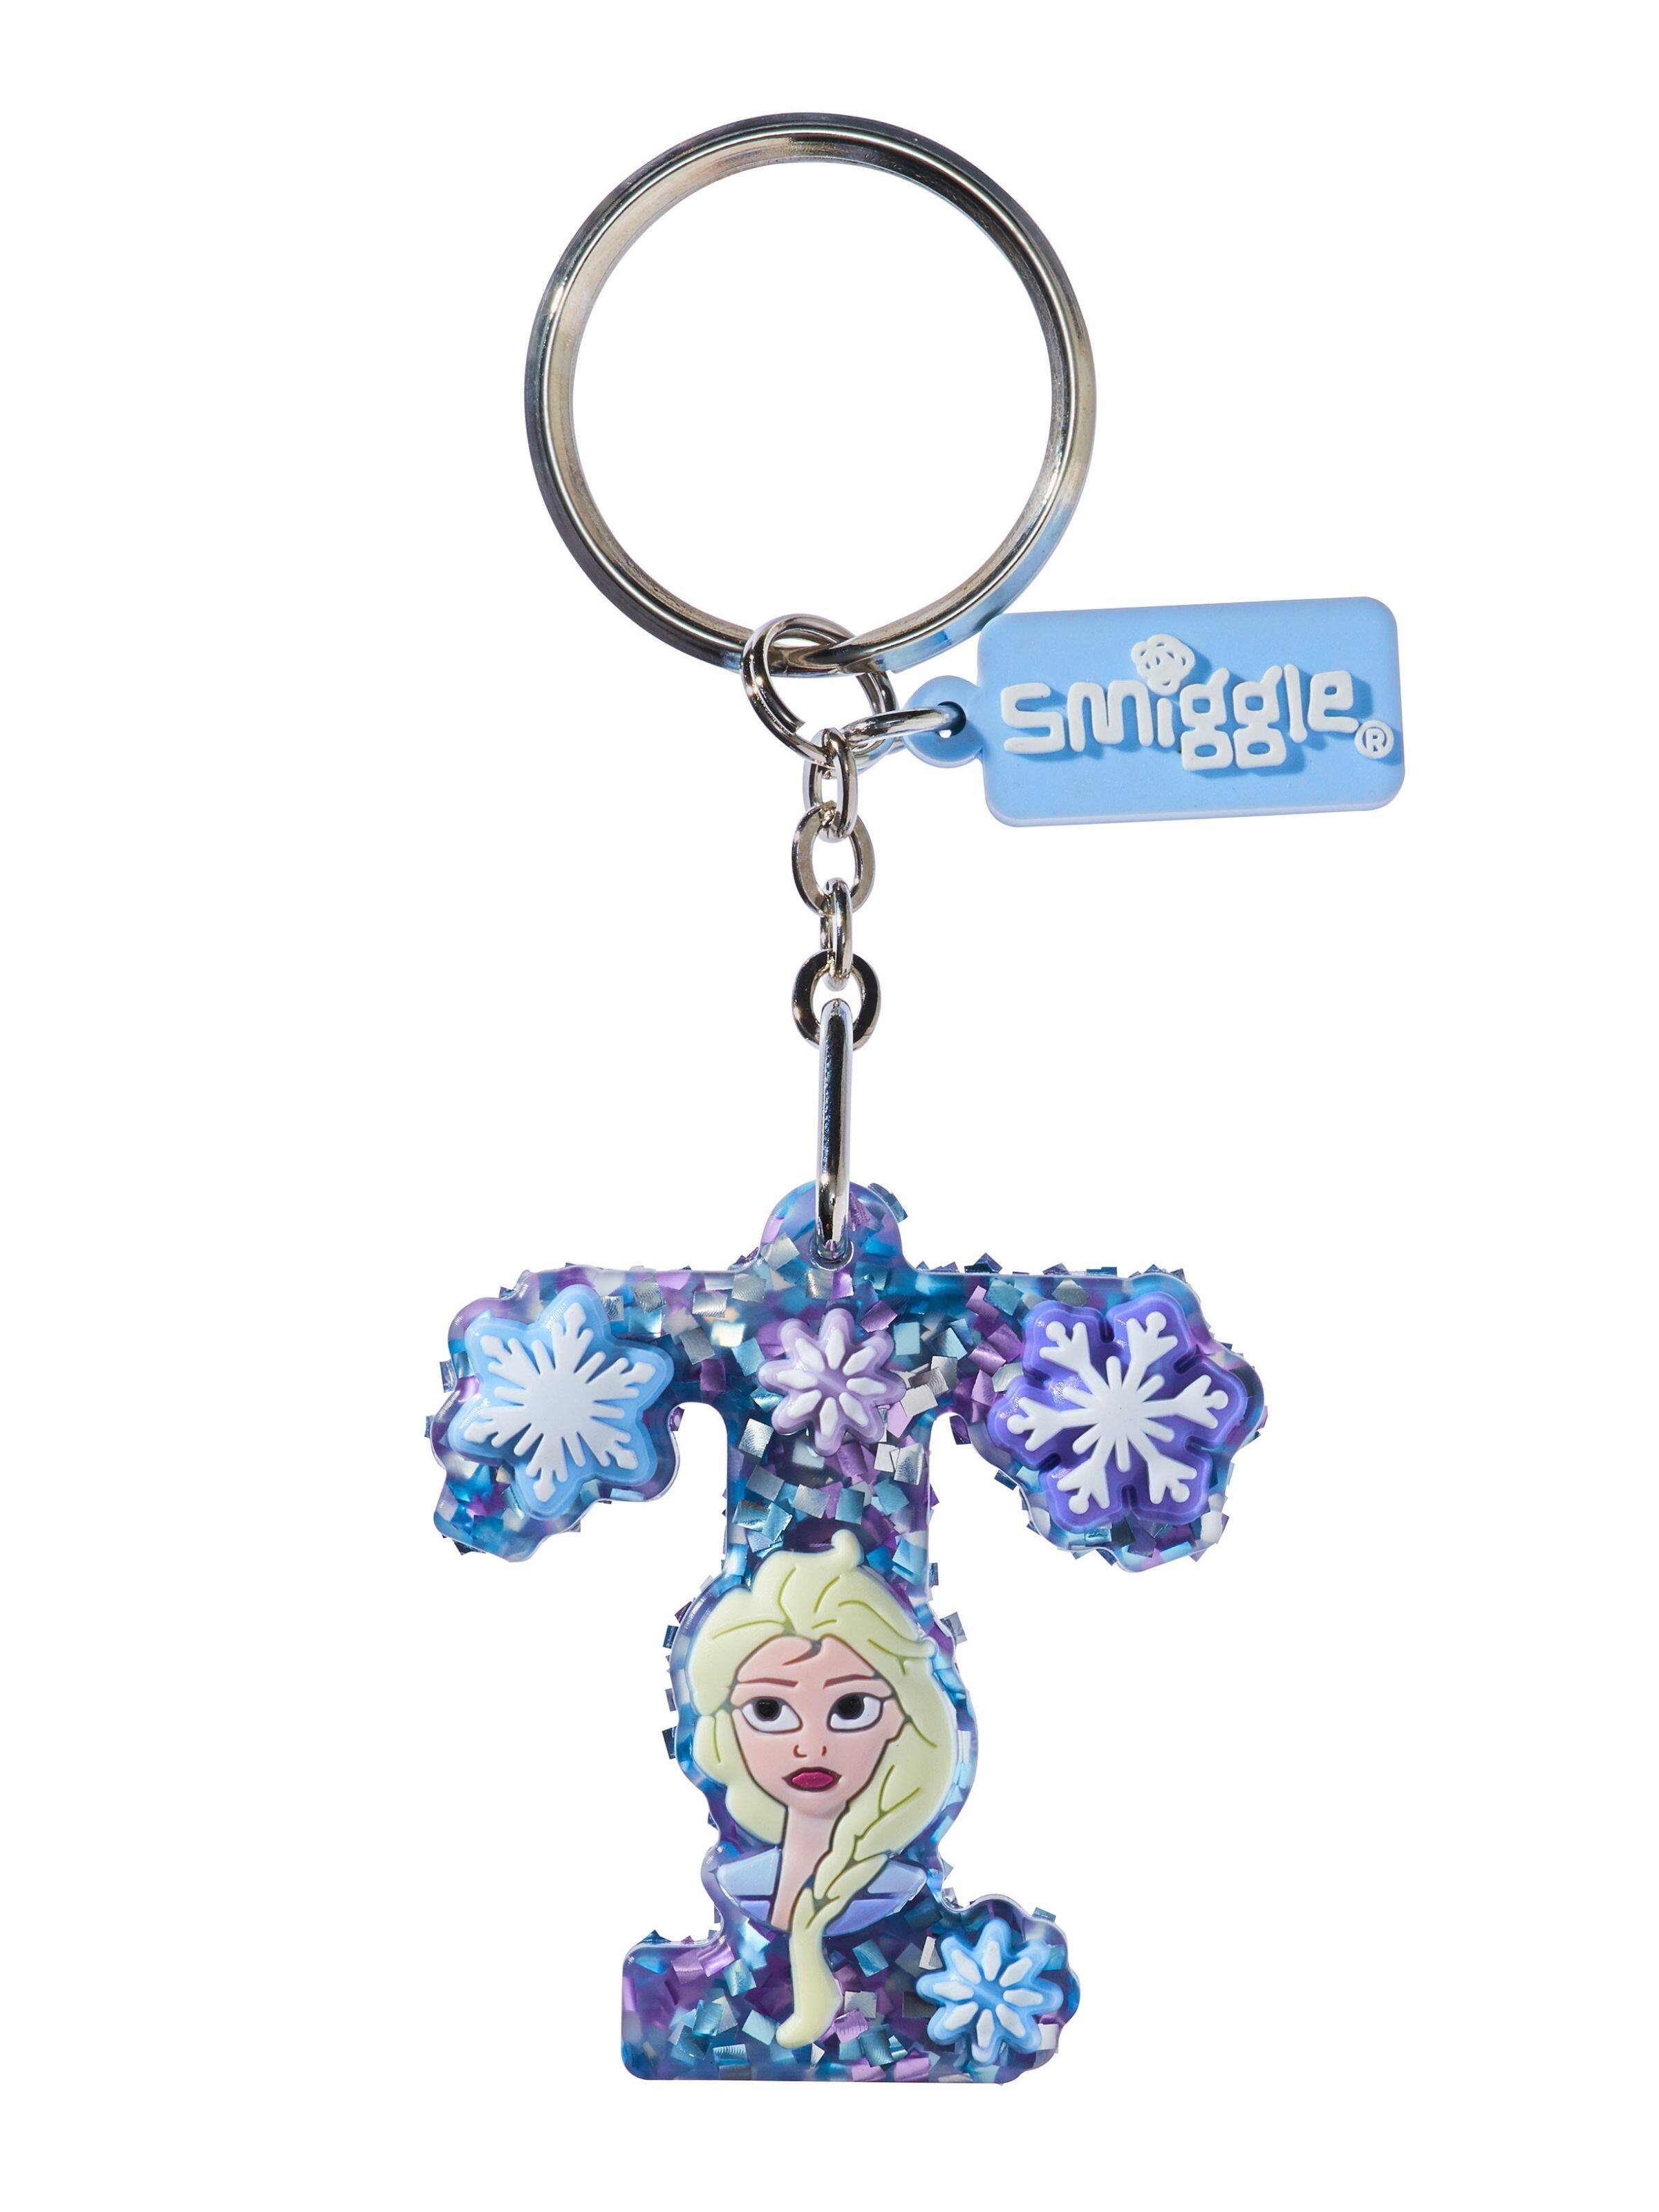 Minions Scented Keyring - Smiggle Online